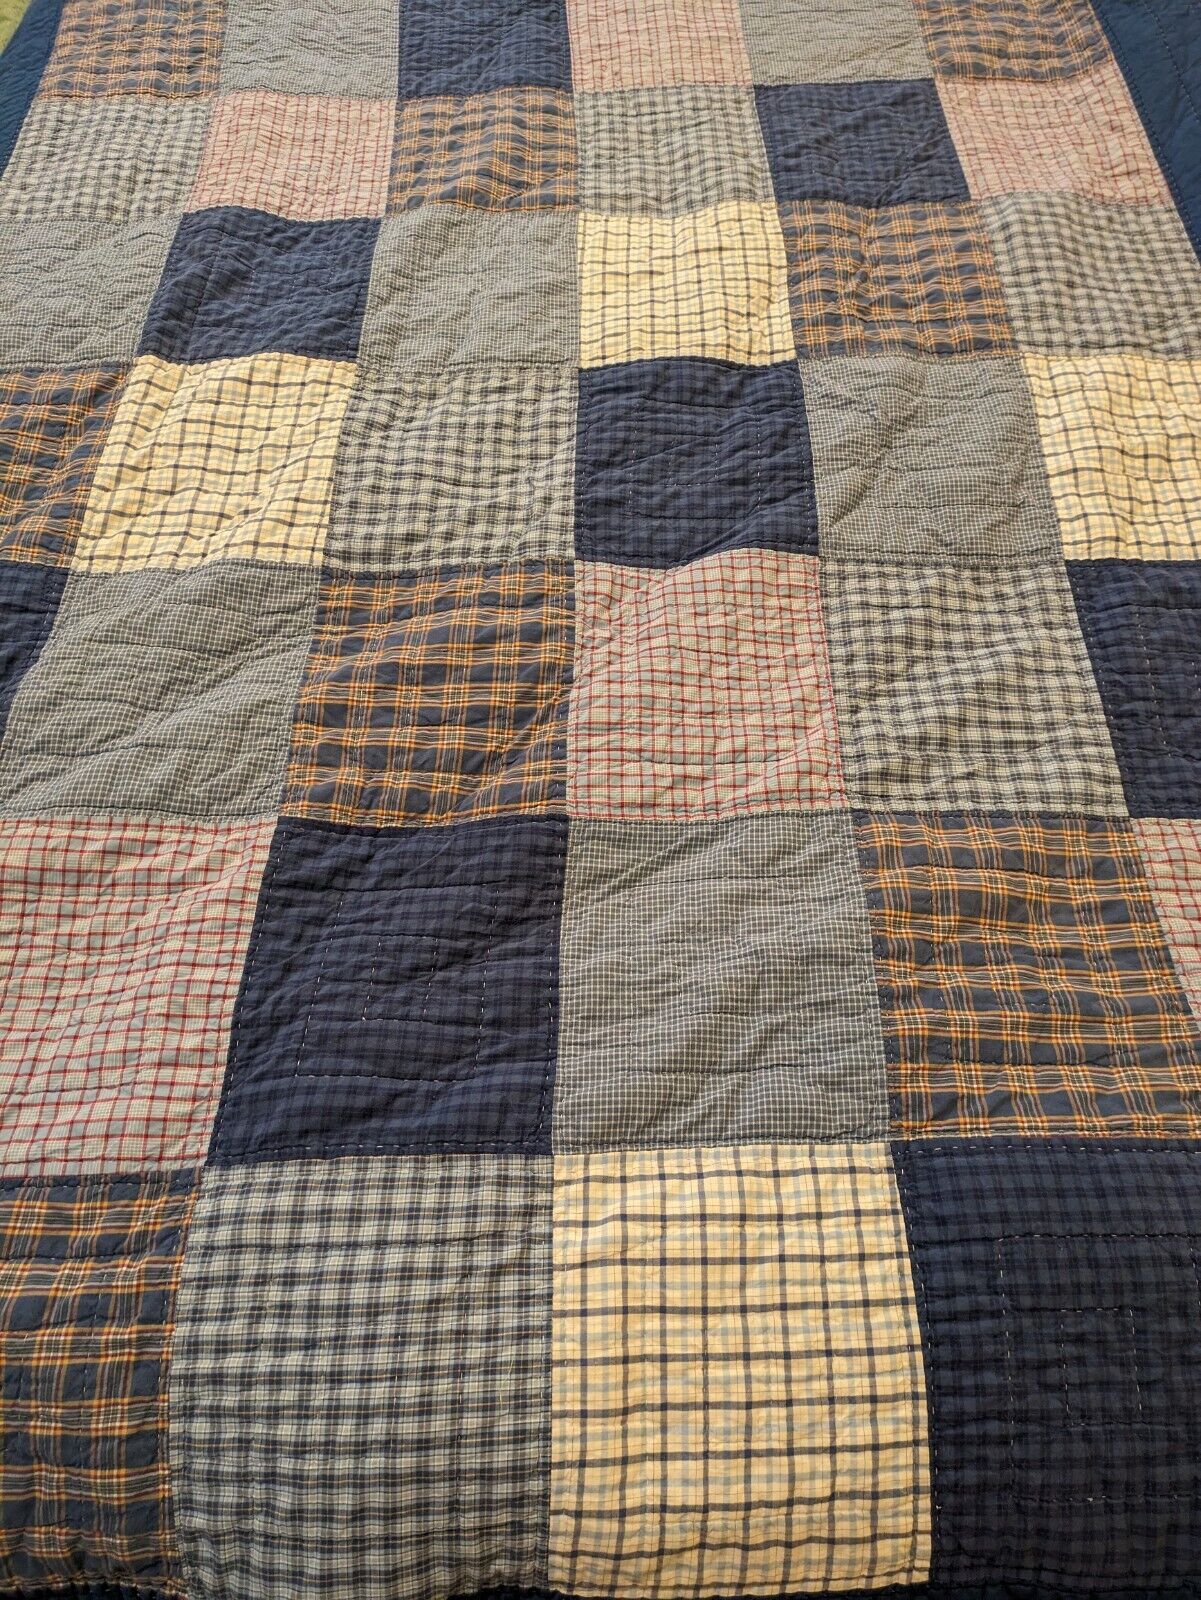 Vintage Patch Work Quilt Twin